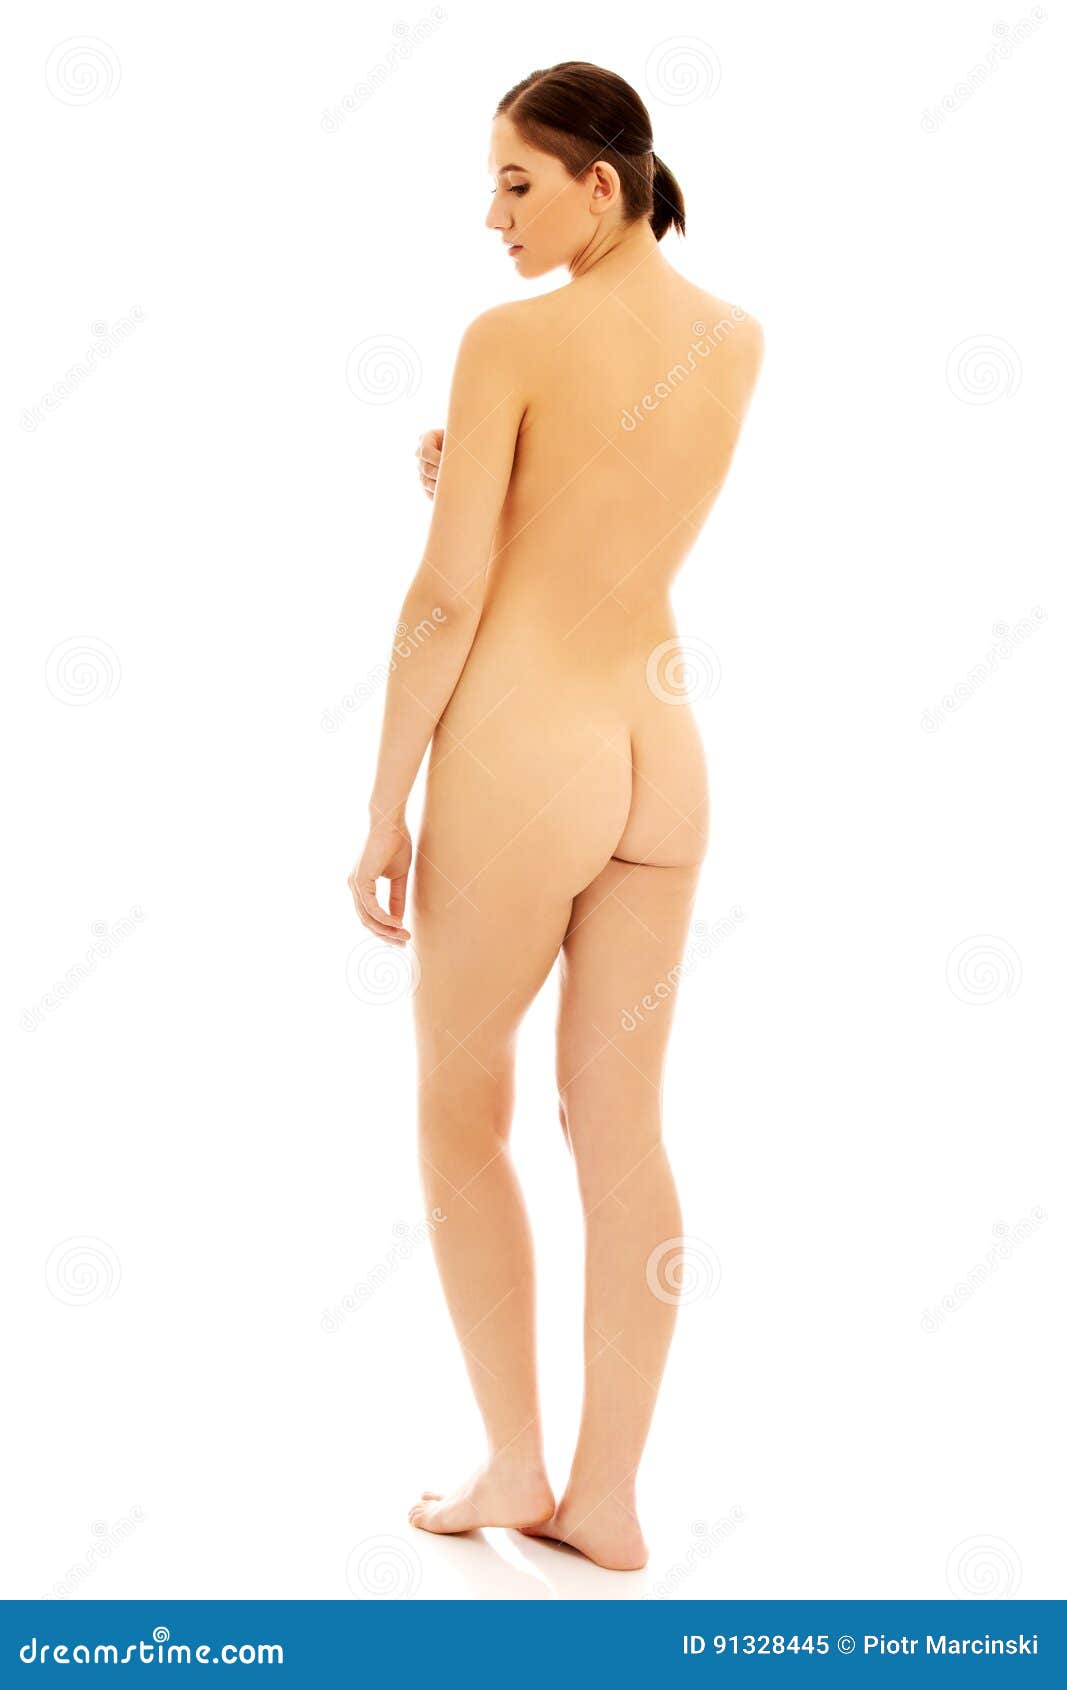 Standing in the nude